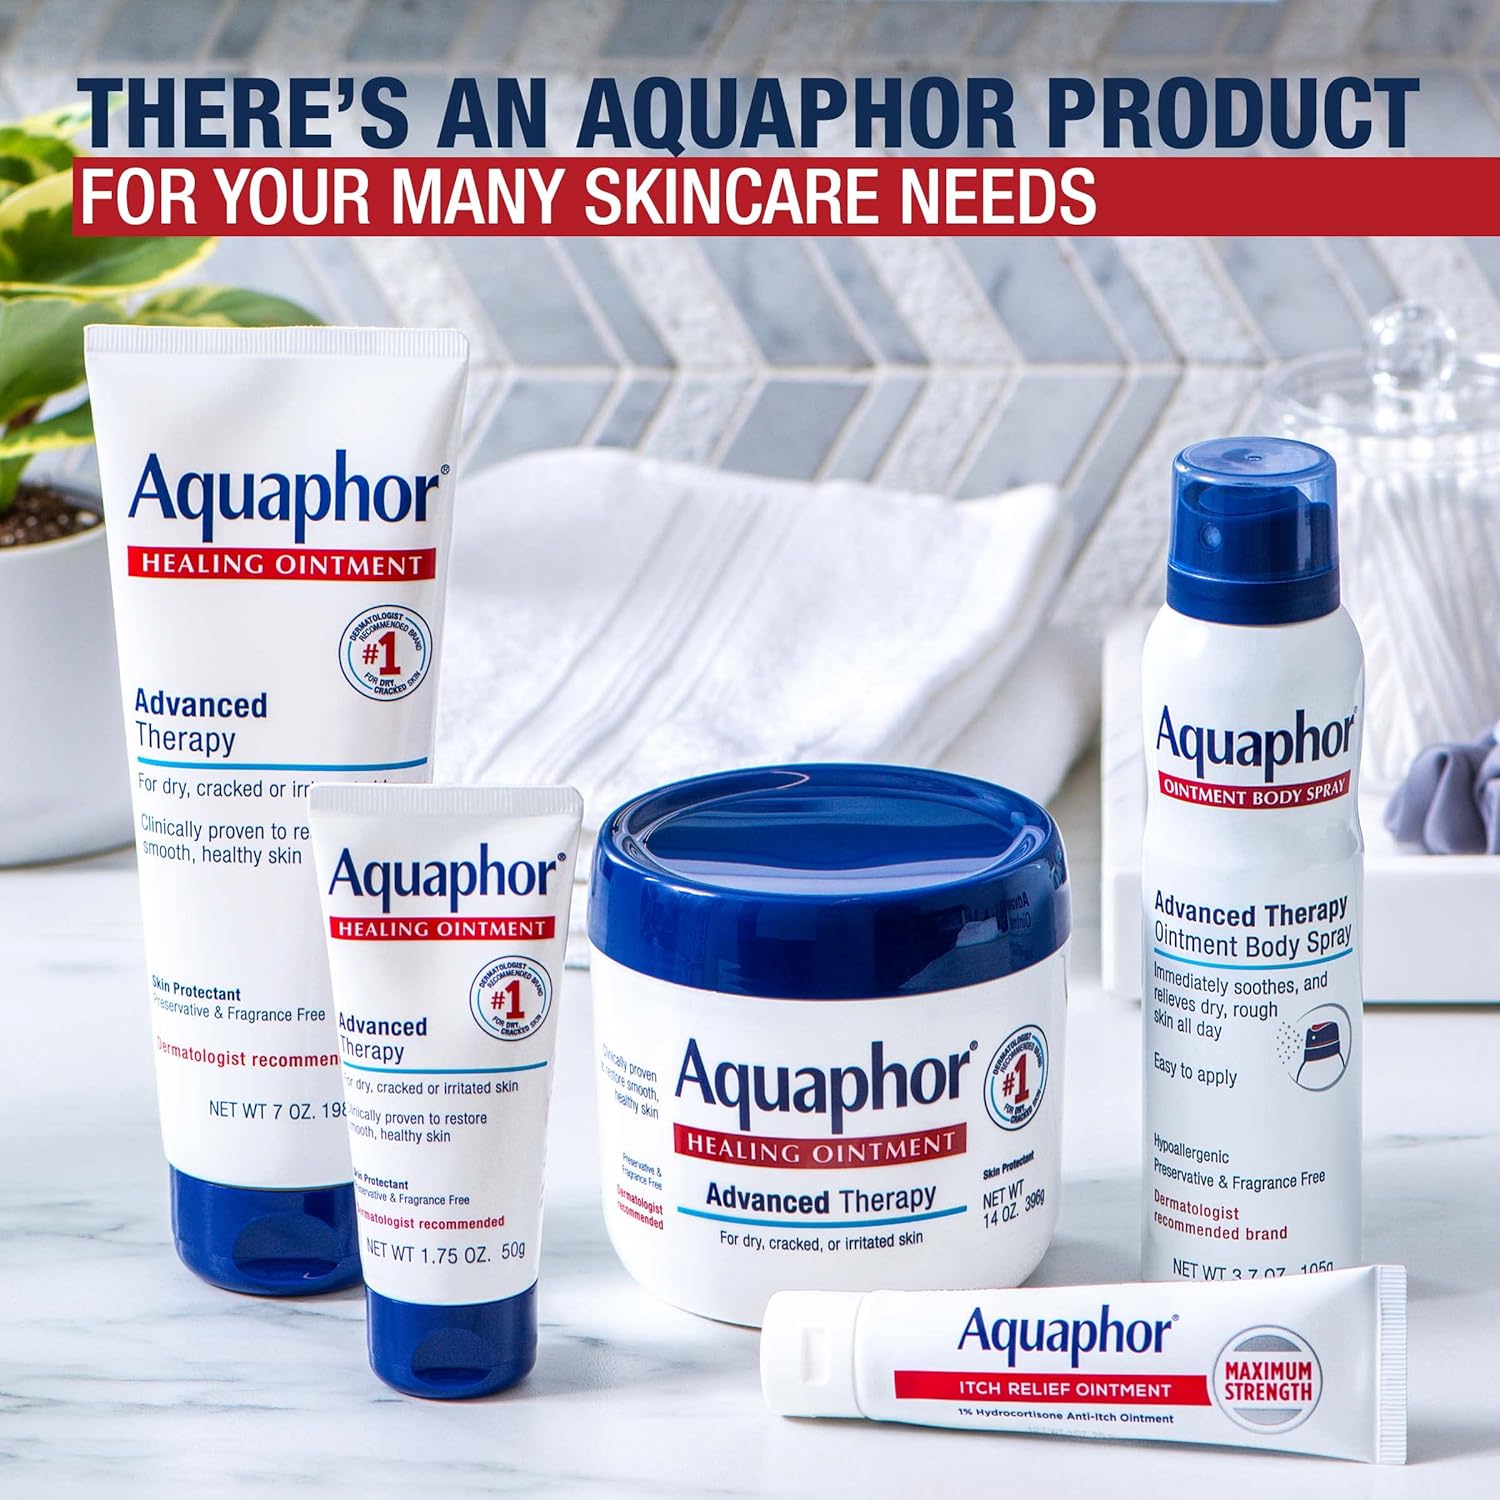 Aquaphor Healing Ointment Advanced Therapy Skin Protectant, Dry Skin Body Moisturizer, 0.25 Oz Jar, Pack of 6 : Beauty & Personal Care